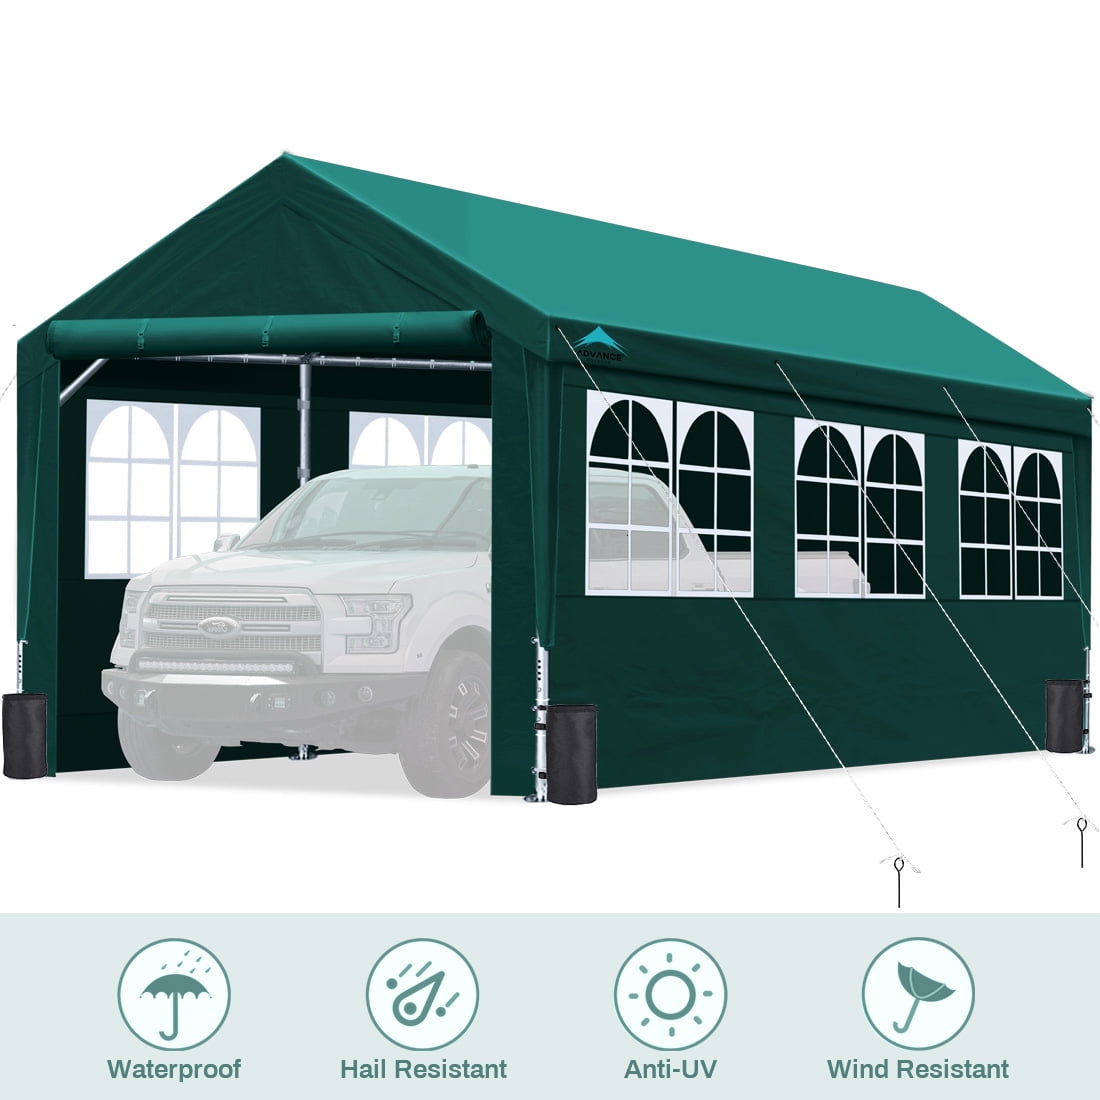 leef ermee meer output ADVANCE OUTDOOR Upgraded 10'x20' Heavy Duty Steel Carport with Adjustable  Height from 9.5 to 11 ft, Car Canopy Garage Party Tent Storage Shed Boat  Shelter with Window Sidewalls and Doors, Green -